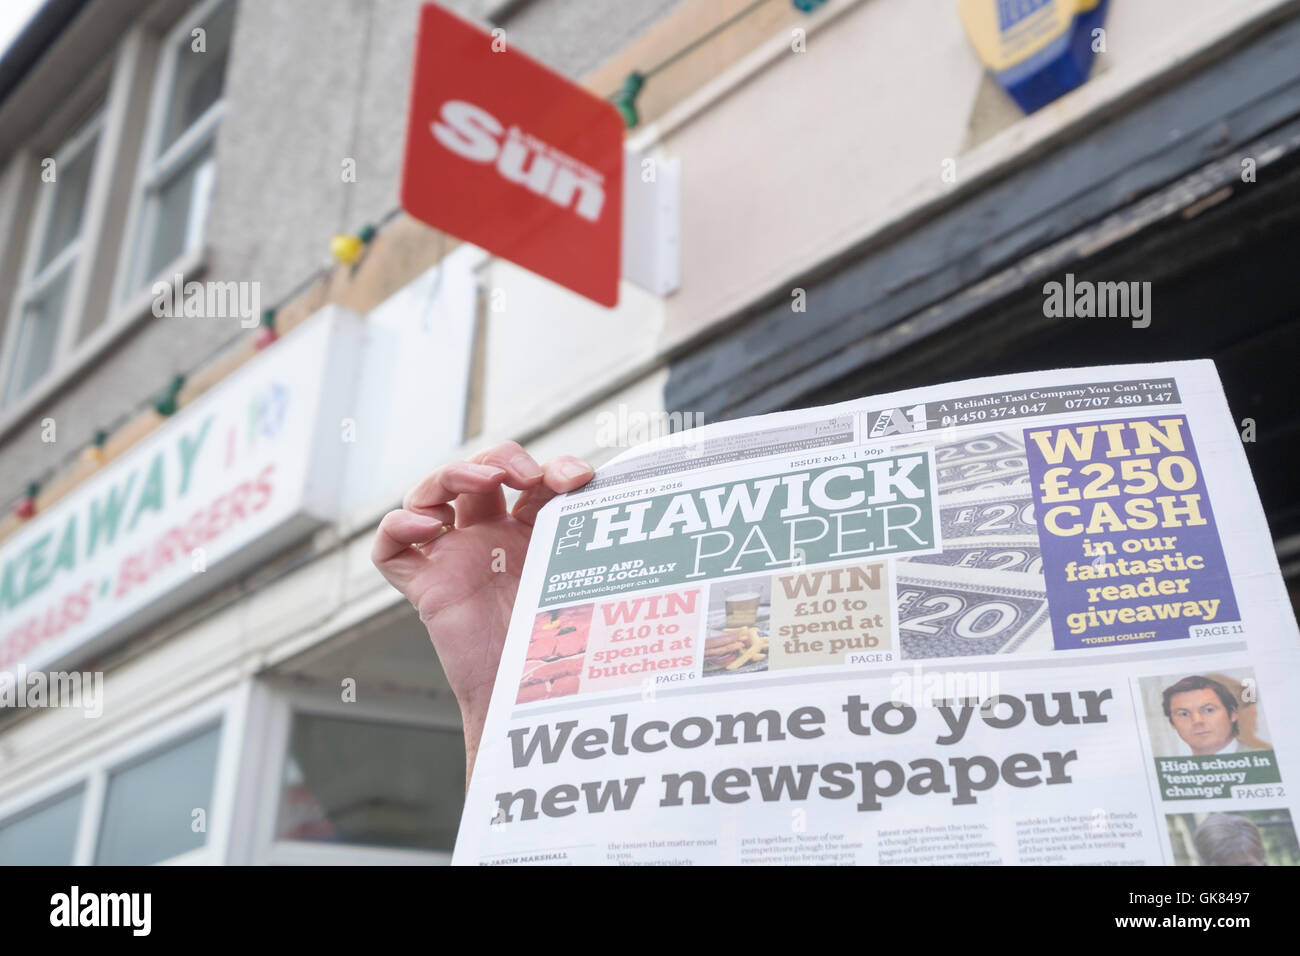 Hawick, UK. 19th August, 2016. New newspaper for Hawick . The first new paper in the town for around 30 years, it will feature community news, sports, letters and features. On sale at a open air 'newsagent' in Burnfoot, with a big interest locally. Not giving the tabloids a run, but a positive feeling in the town. Credit:  Rob Gray/Alamy Live News Stock Photo